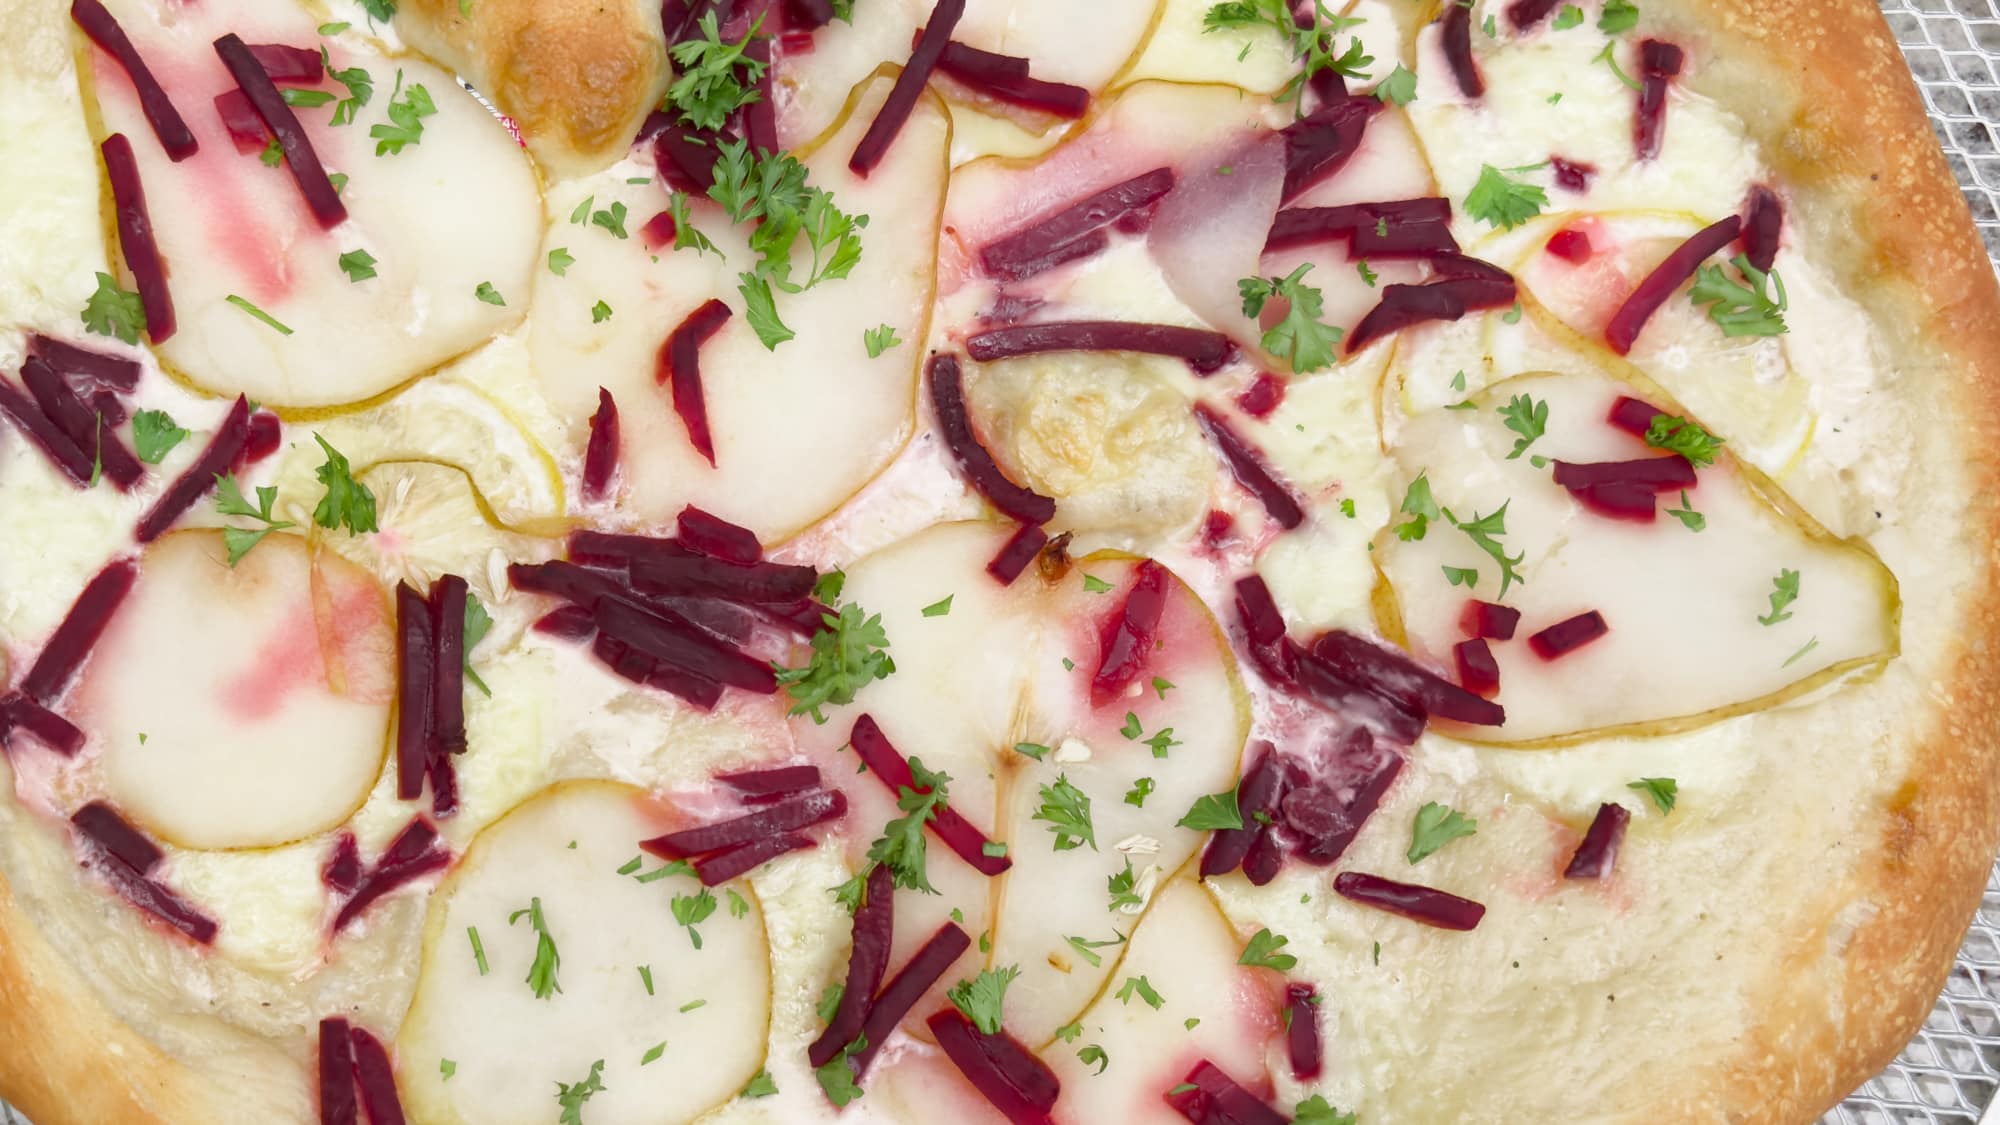 Pear Beet & Lemon Pizza with Parsley & White Cheddar Video